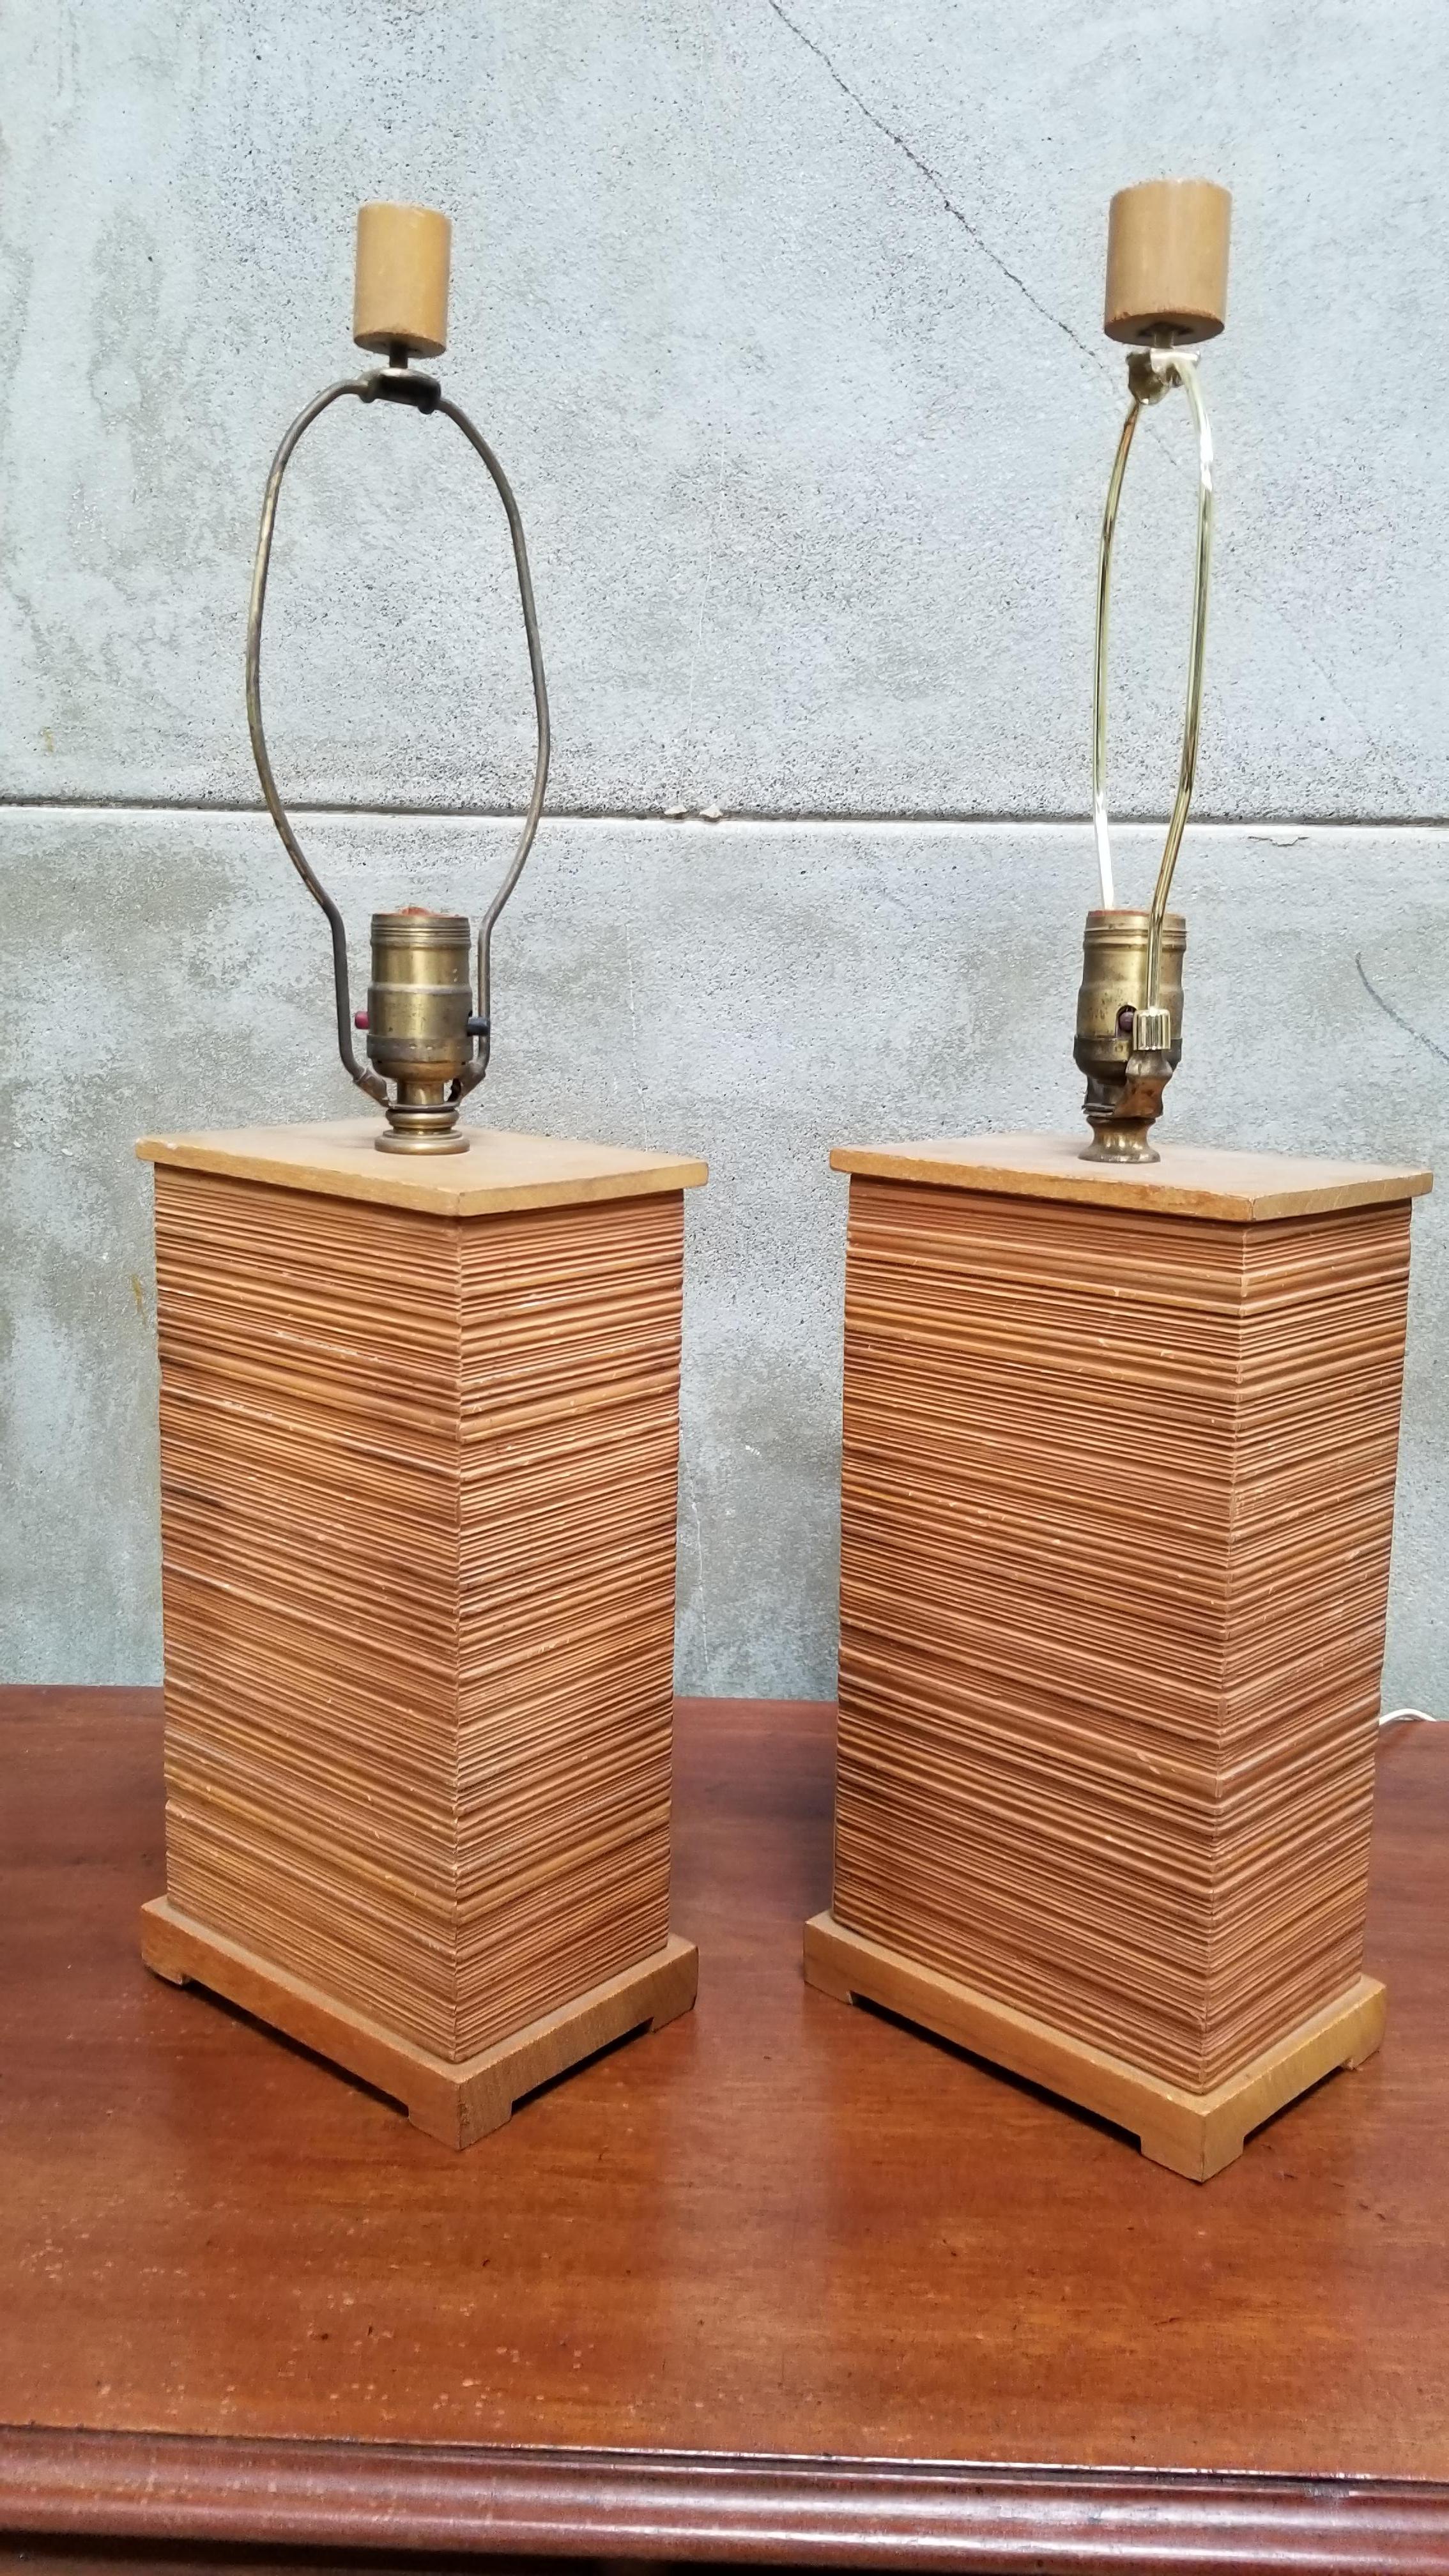 Paul Frankl Combed Fir Table Lamps, a Pair For Sale 4